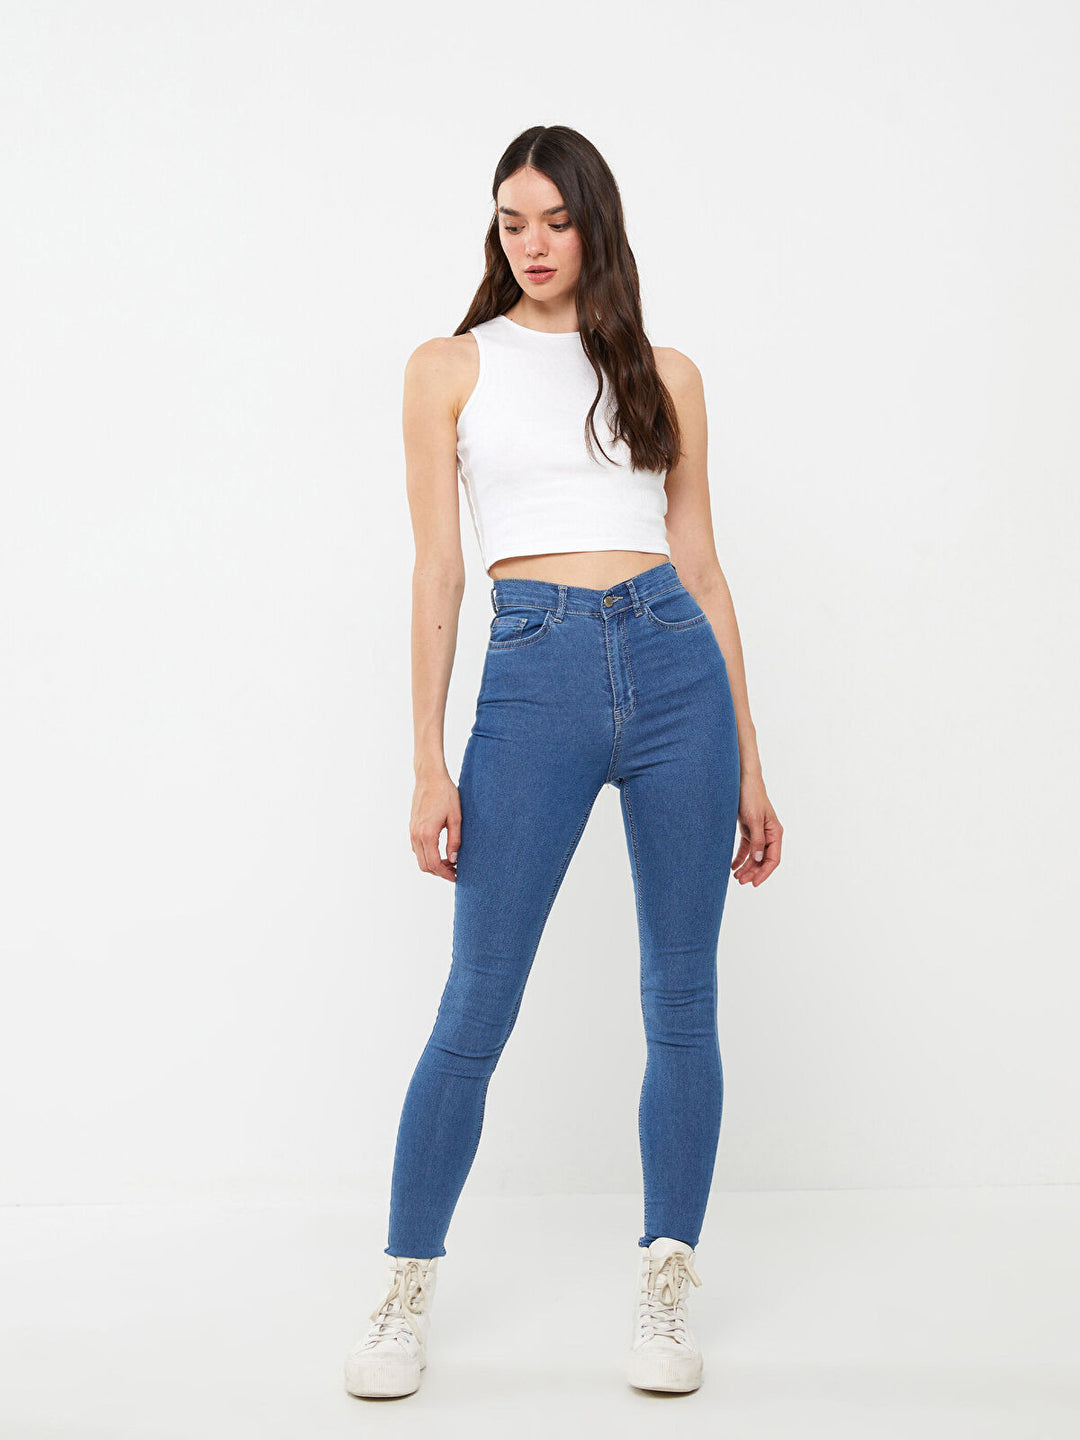 LCW Jeans High Waisted Skinny Fit Women Denim Trousers